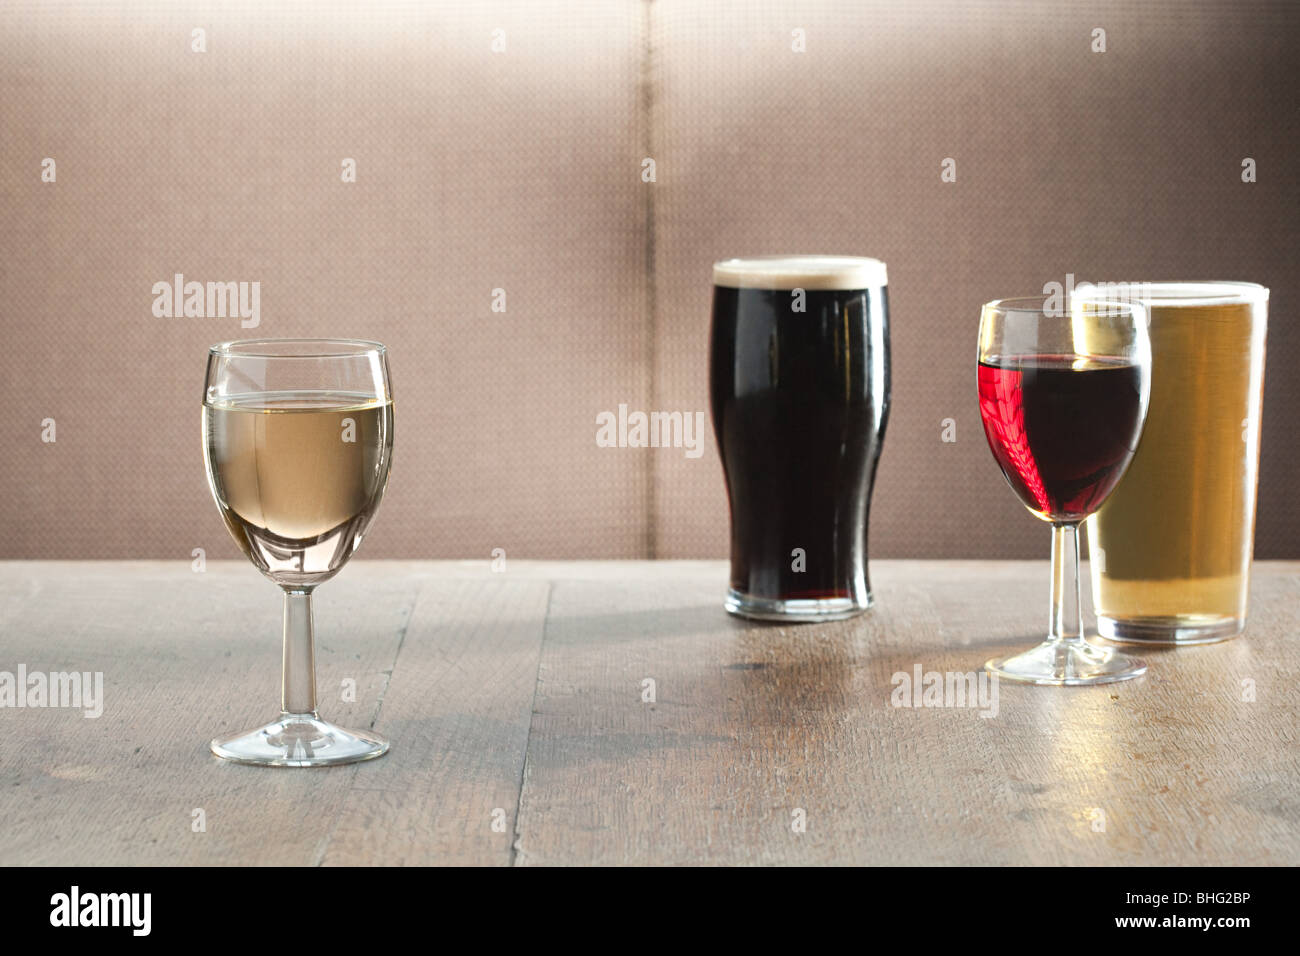 Wine and beer glasses on table in bar Stock Photo